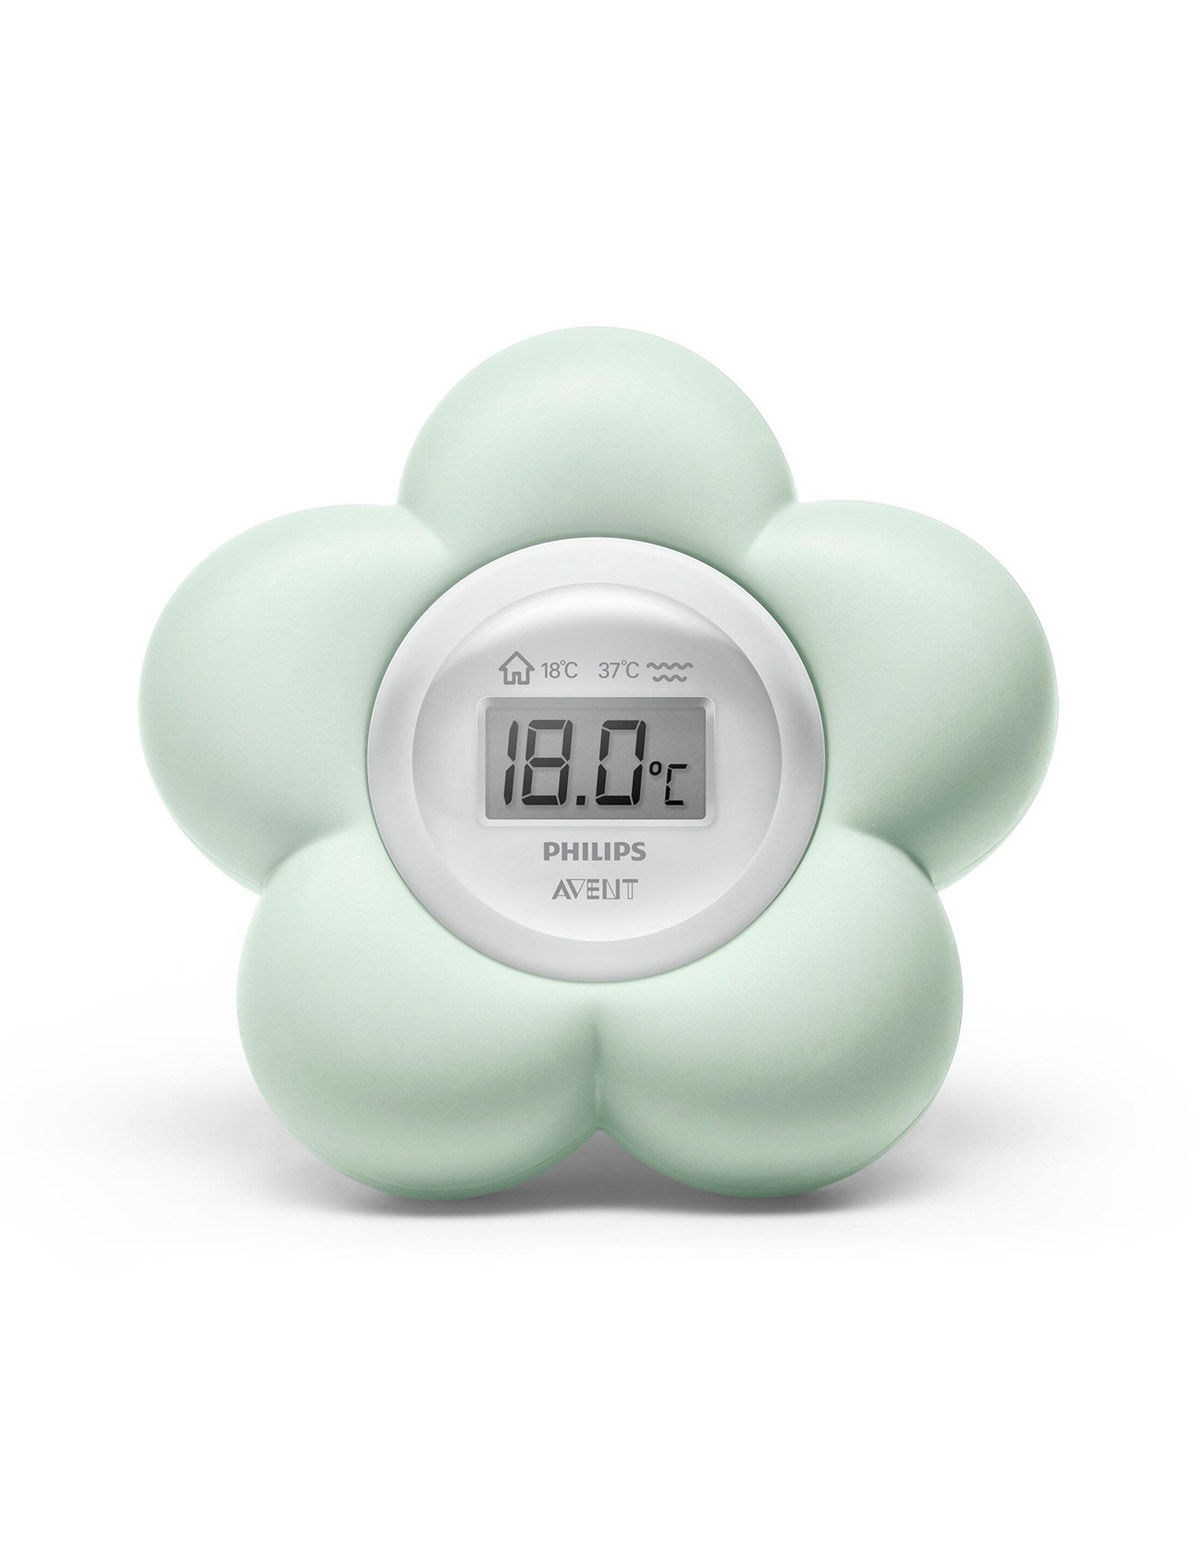 Philips Avent Digital Bath & Bedroom Thermometer Mint, Accessories